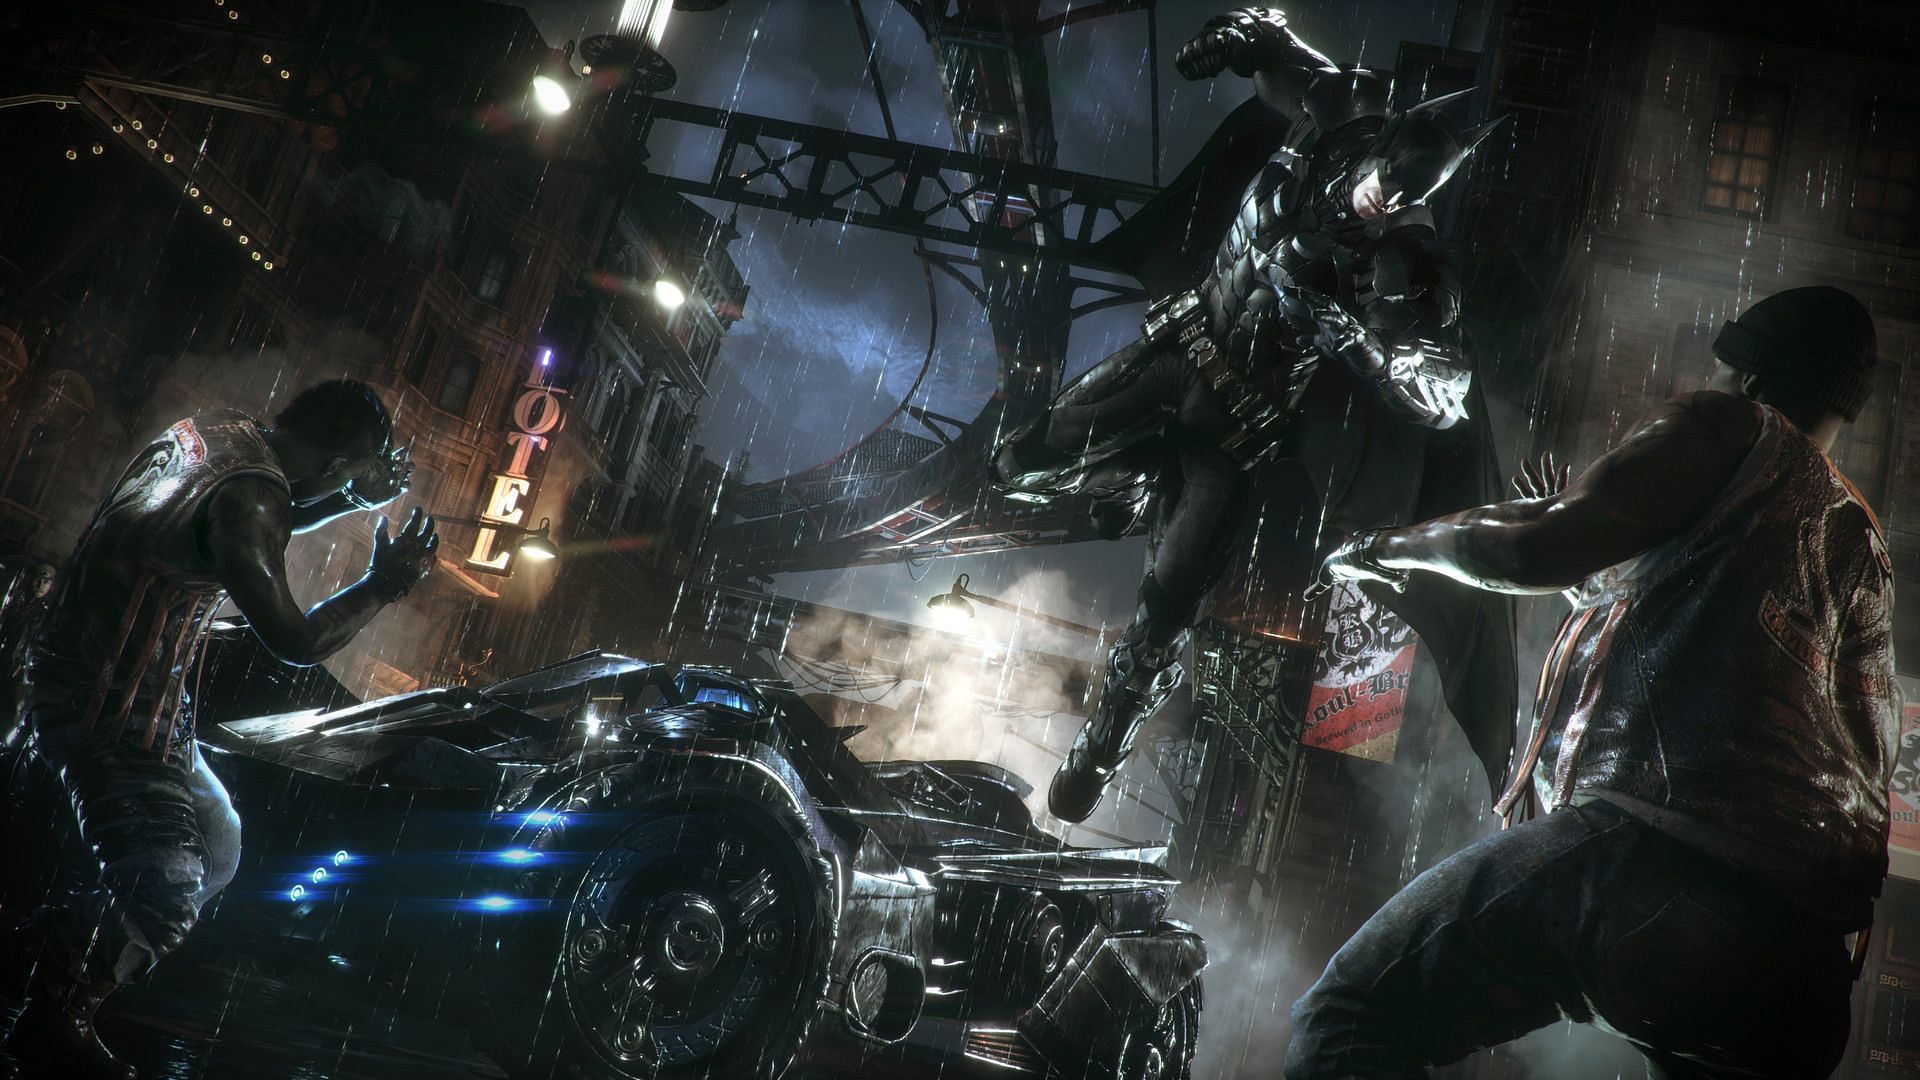 The map of Gotham City in Arkham Knight features many activities players can interact with (Image via Rocksteady Studios/Steam)